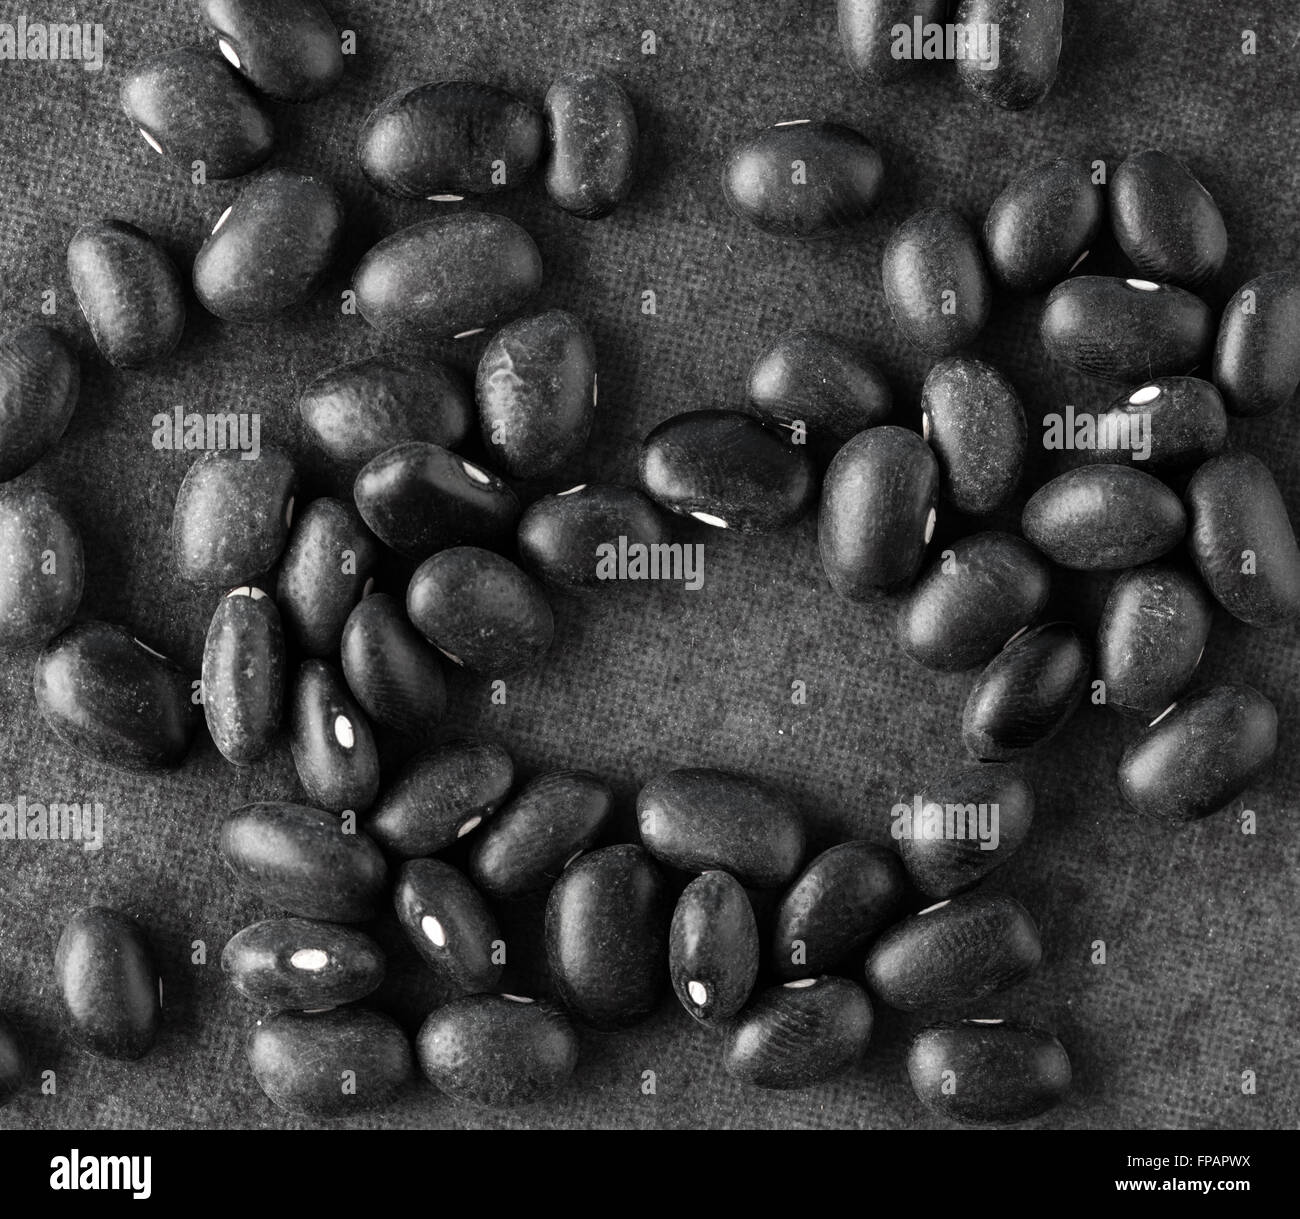 Black turtle beans on dark surface. Top view. Stock Photo